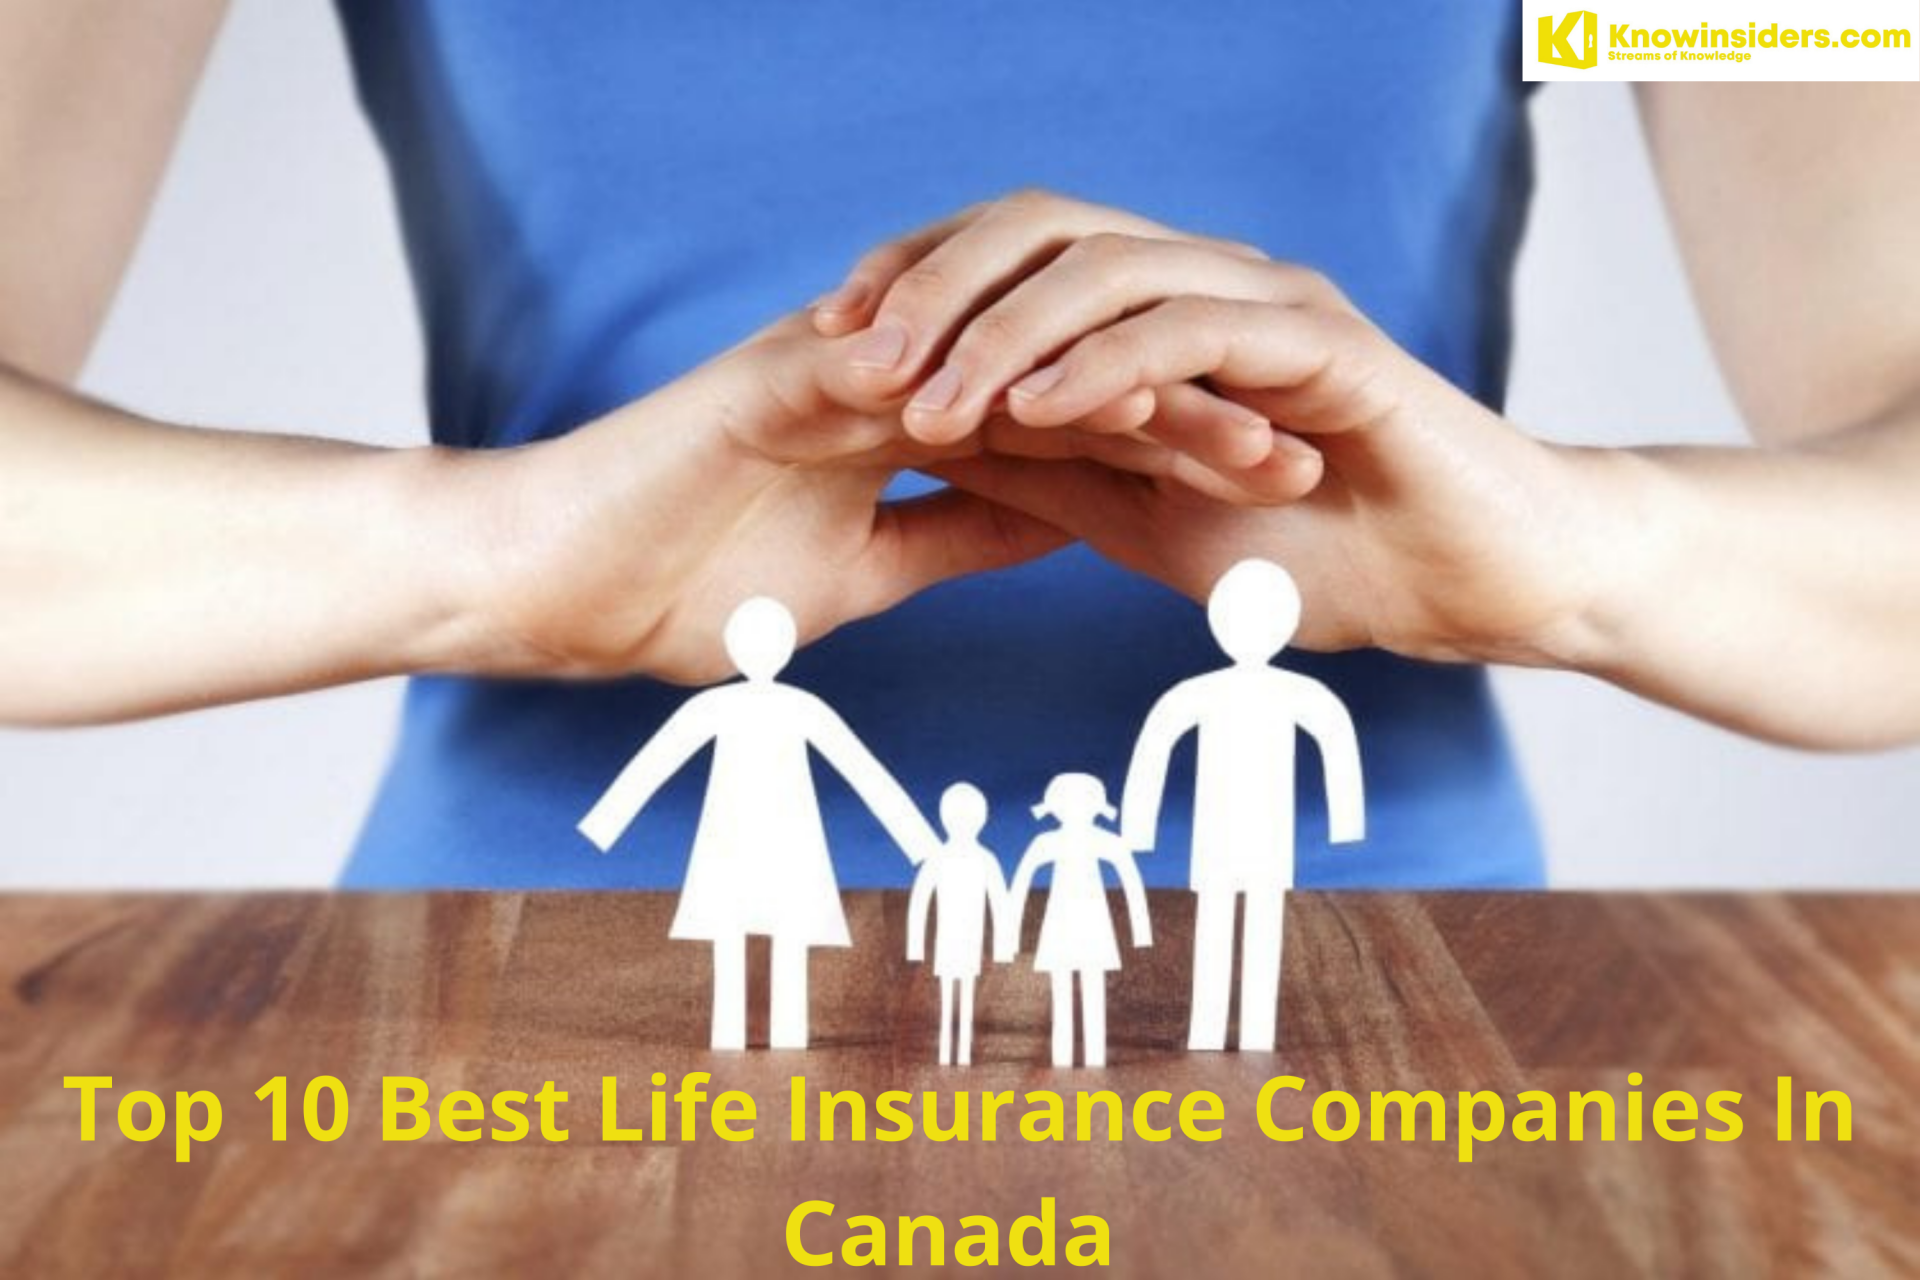 10 Best Life Insurance Companies In Canada: Cheapest Quotes and Good Services